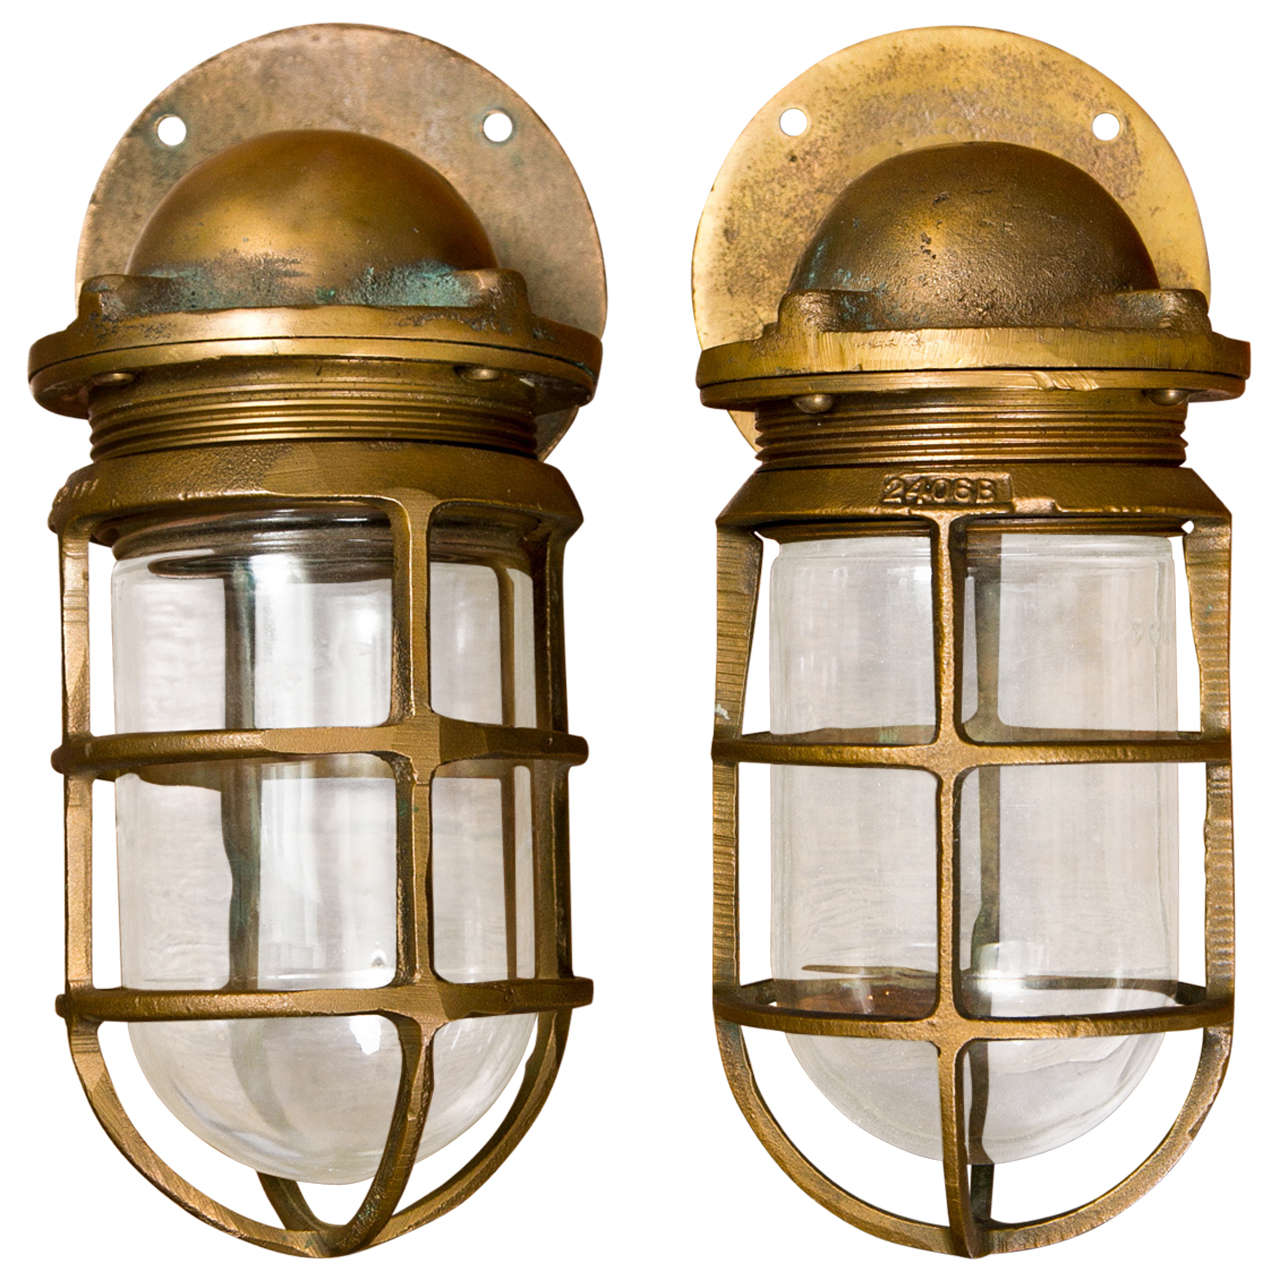 Pair Of Bronze Ship's Passage Lamps With Side Wall Mounts For Sale